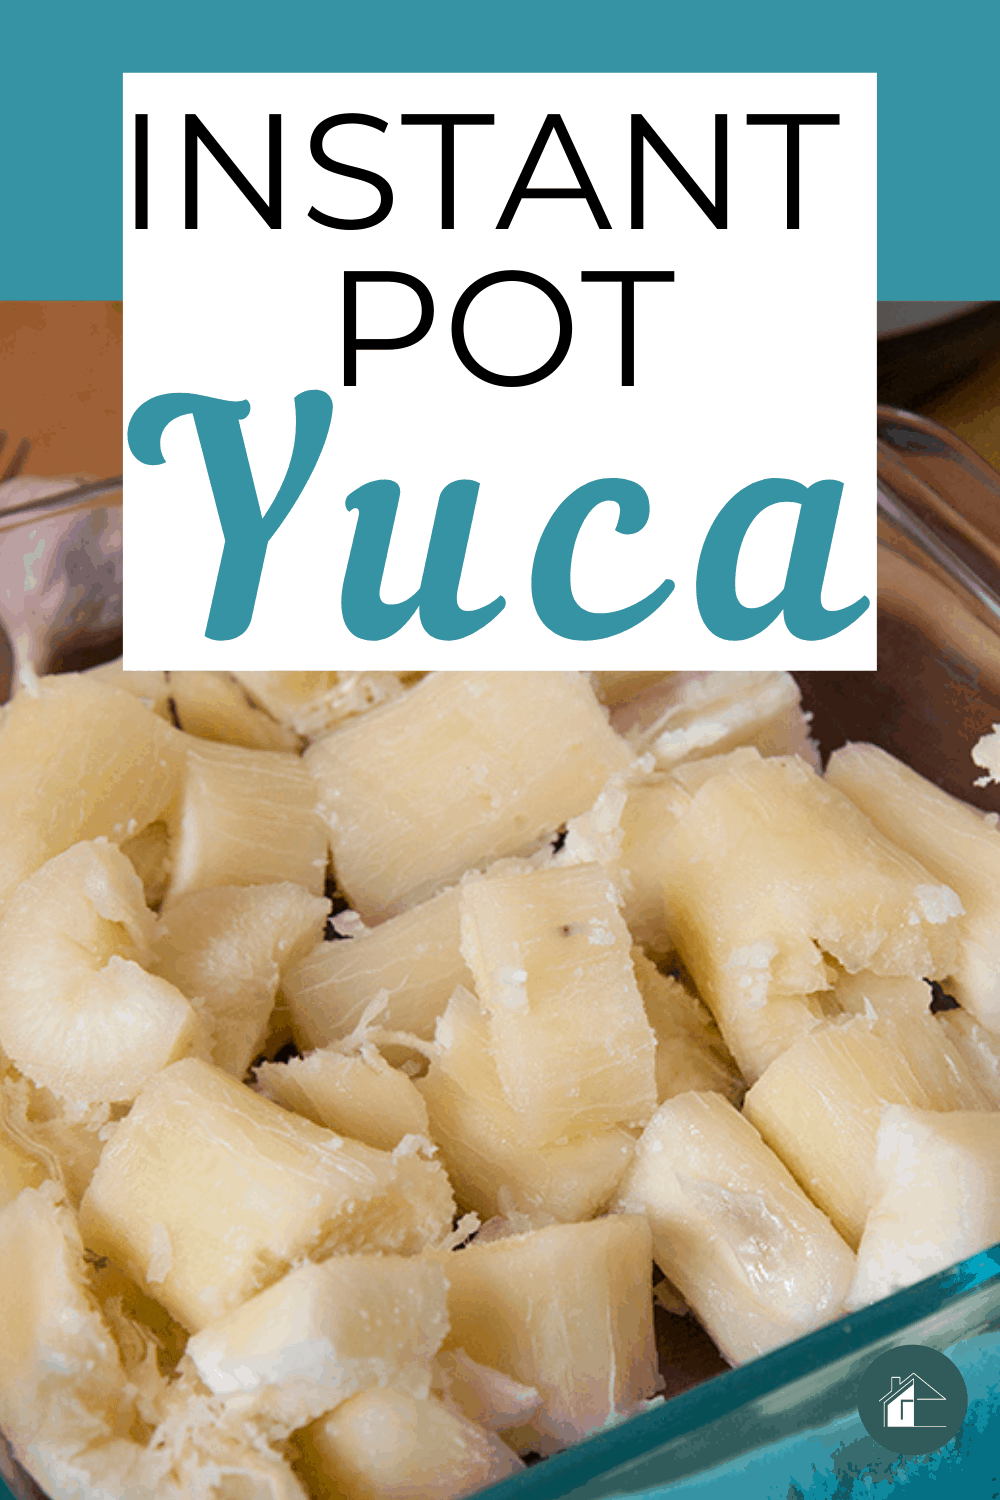 Cooking yuca has never been easy now that we got the Instant Pot. If you enjoy yuca as I do, I’ll show you how to cook yuca using an instant pot. via @mystayathome